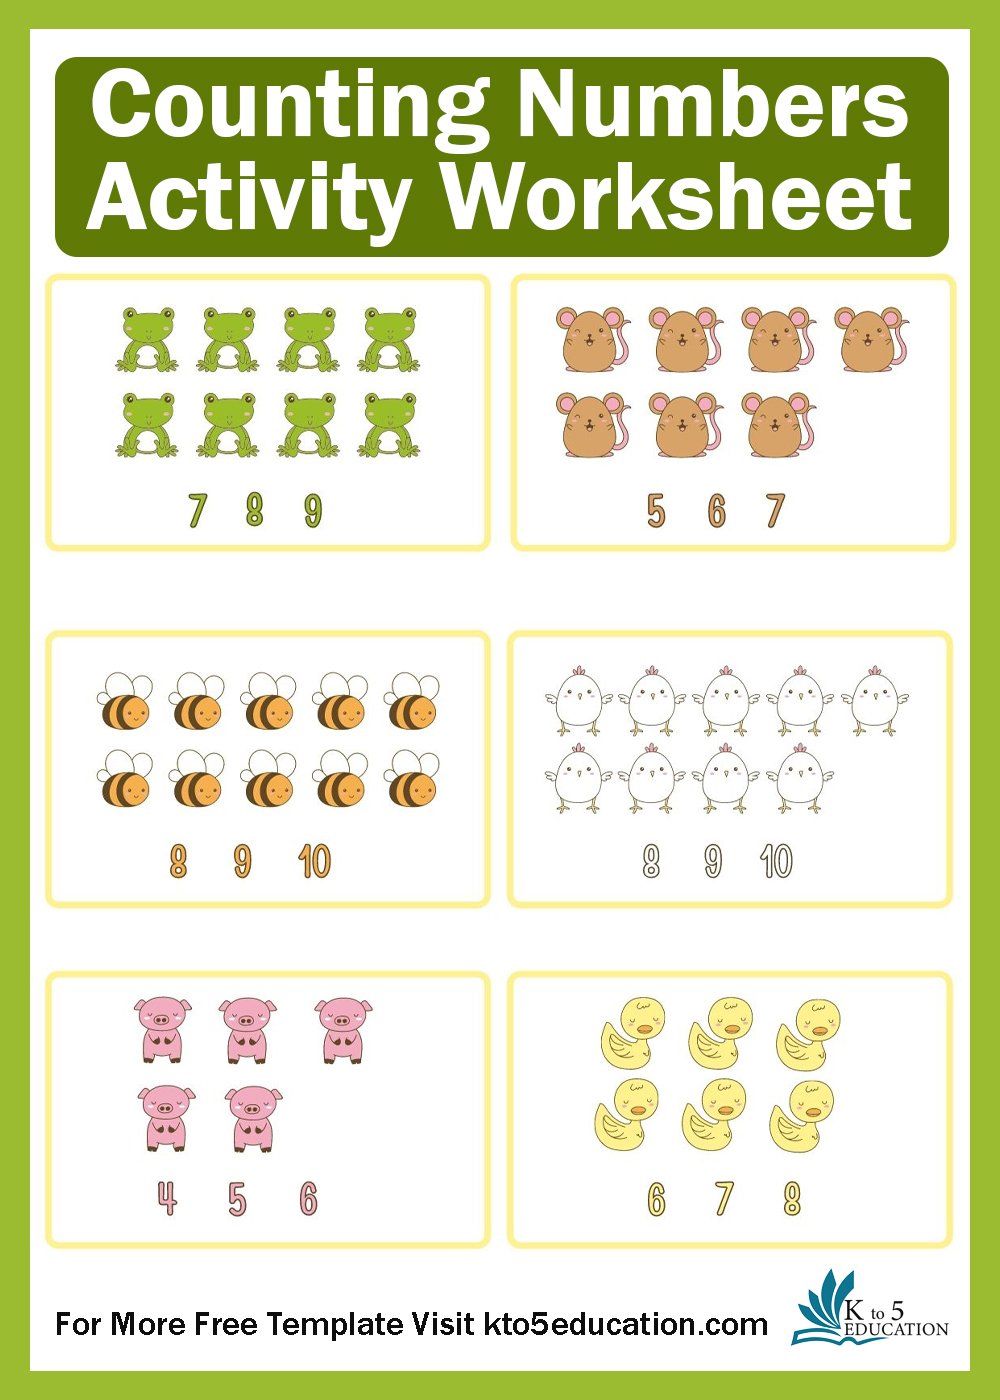 Counting Numbers Activity Worksheet